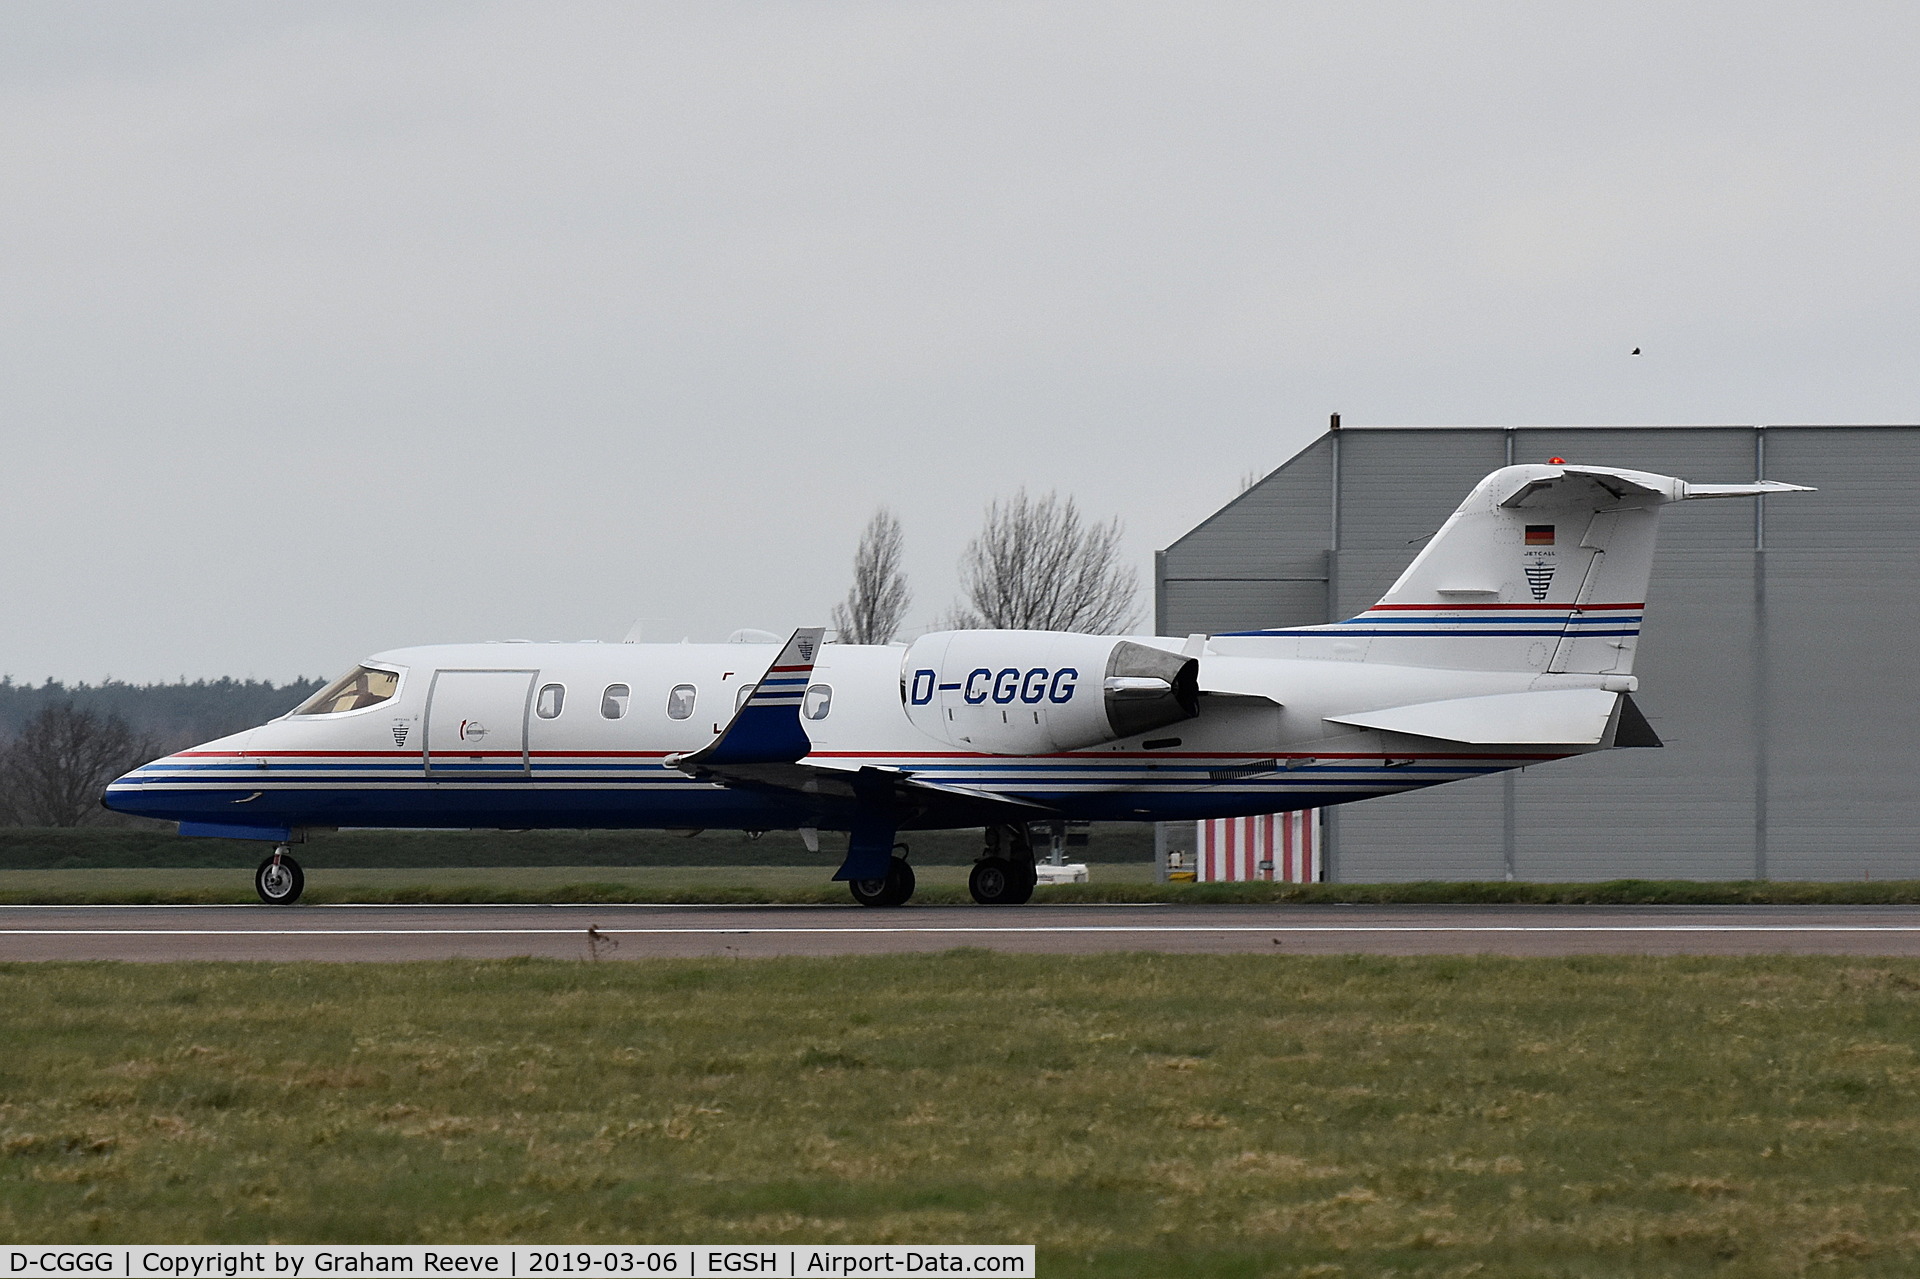 D-CGGG, 2001 Learjet 31A C/N 31A-227, Departing from Norwich.